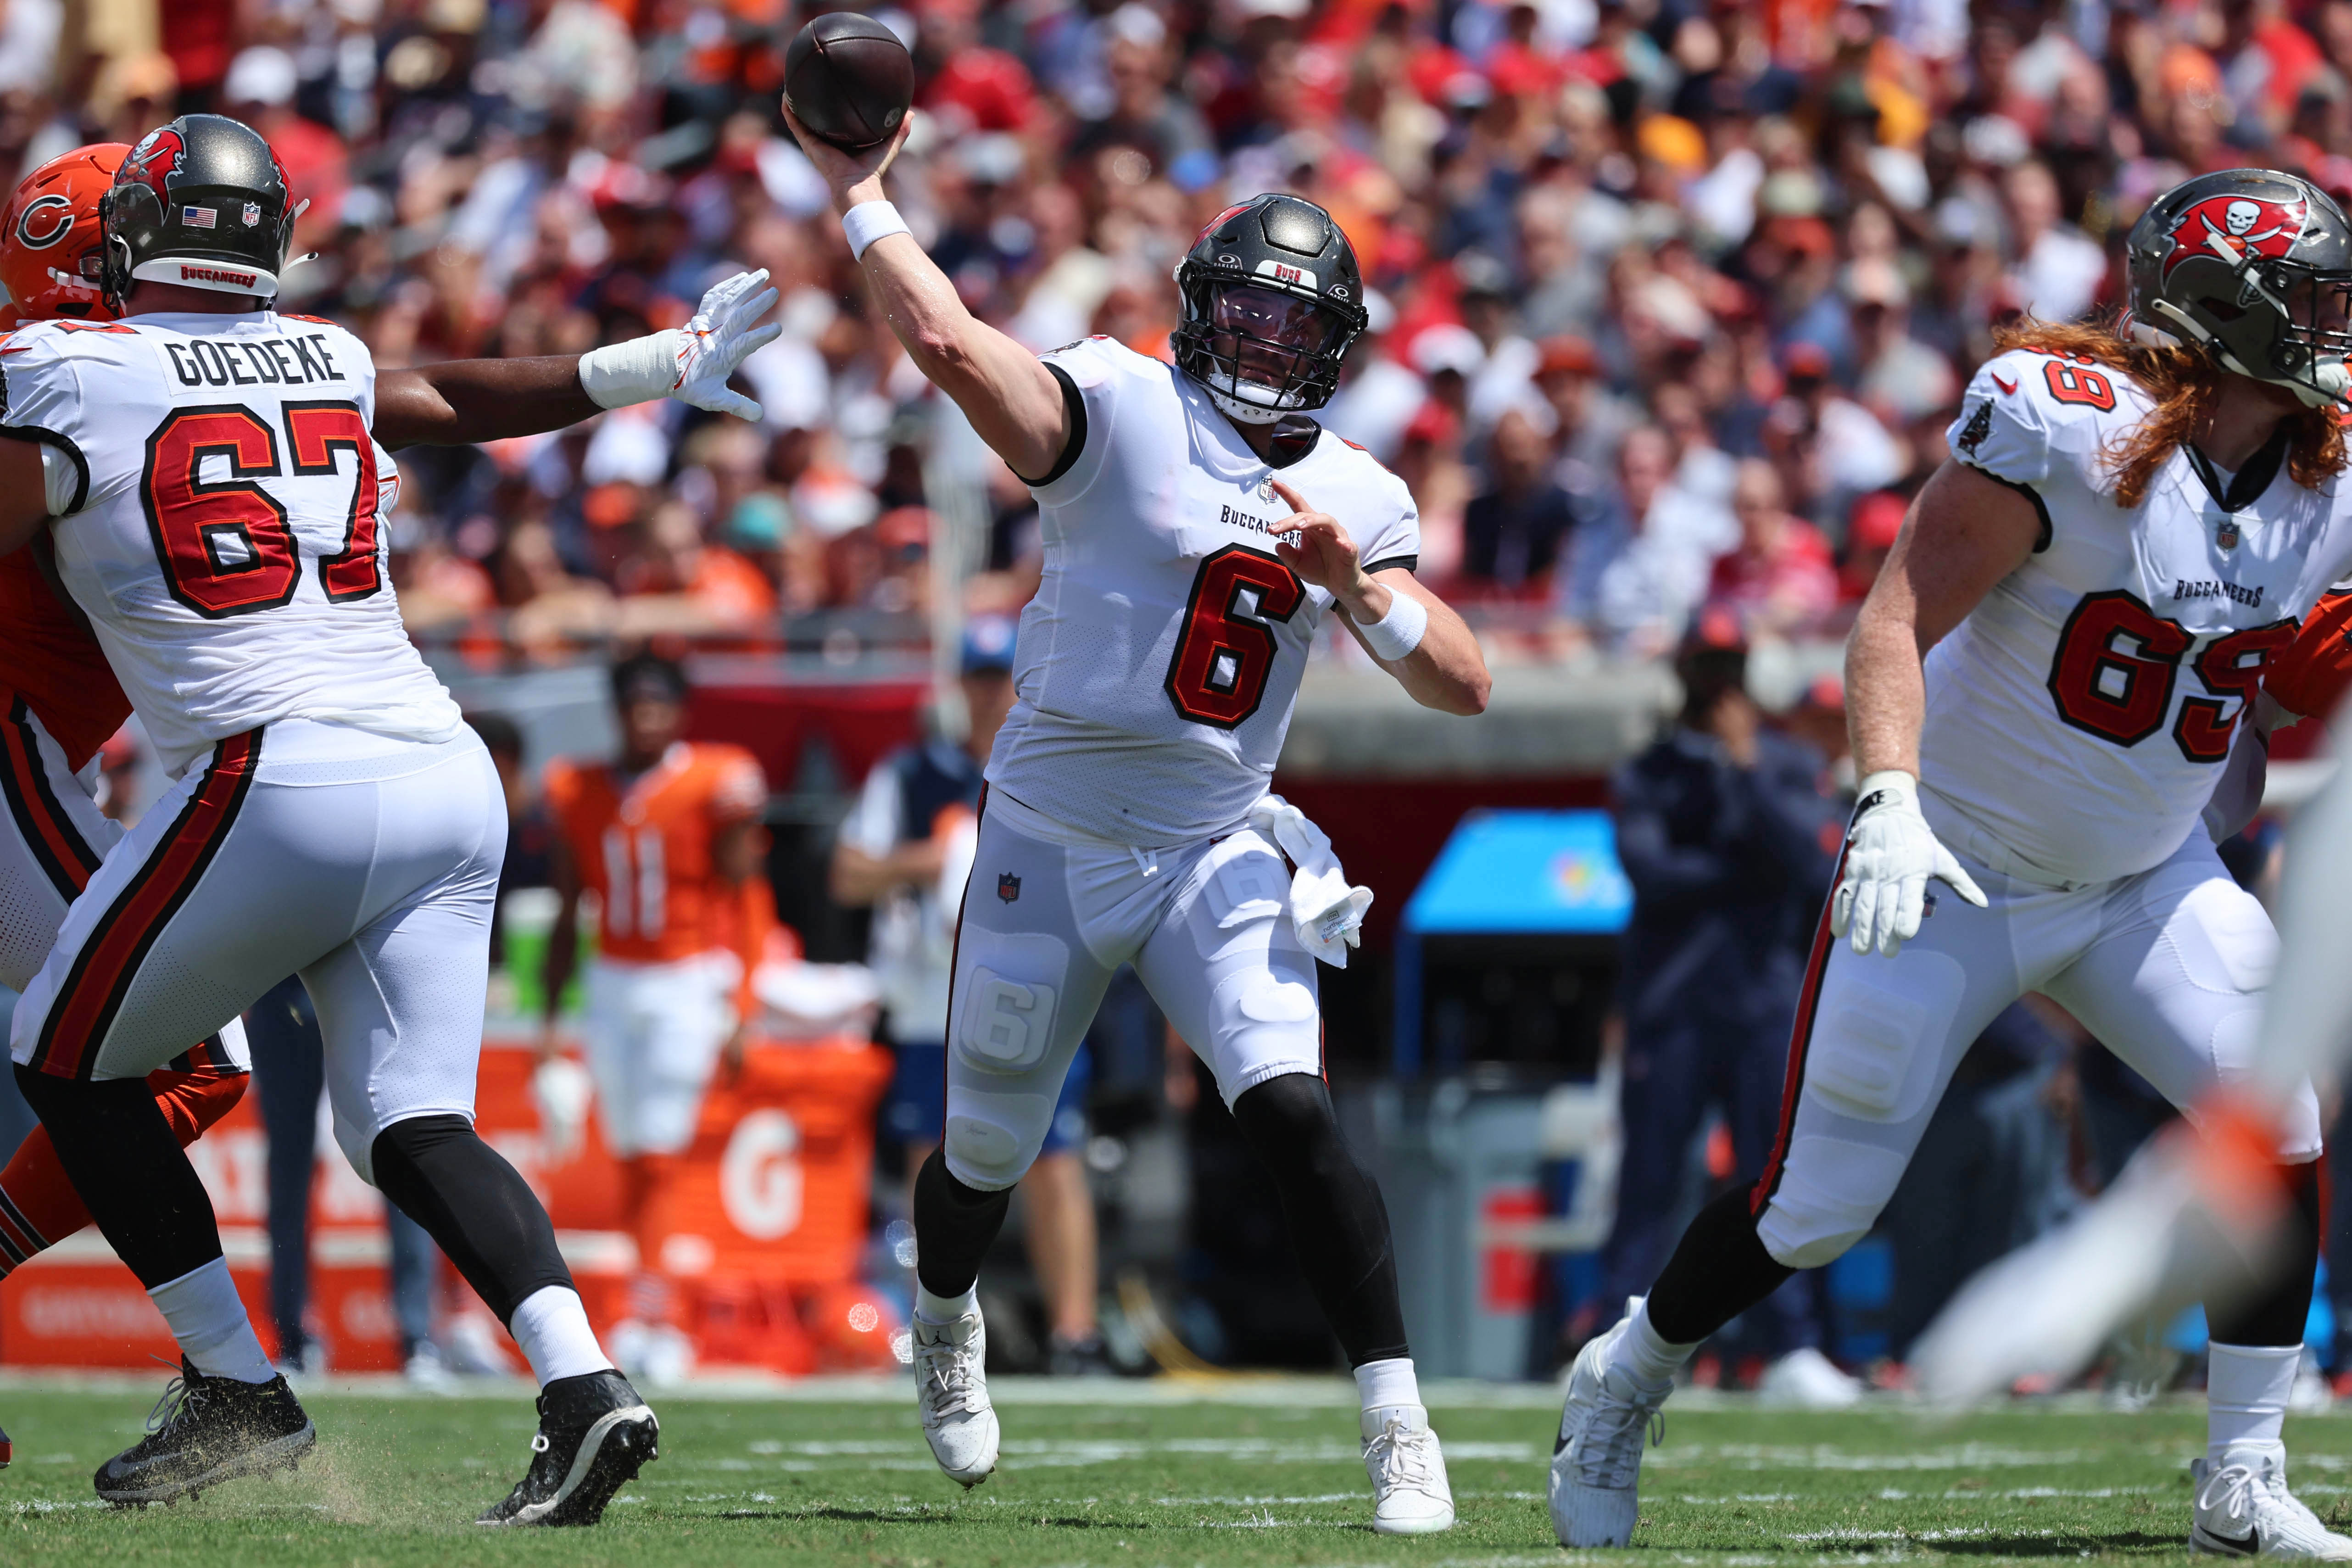 Tampa Bay Buccaneers quarterback Baker Mayfield (6) throws the ball against the Chicago Bears during the first quarter at Raymond James Stadium.